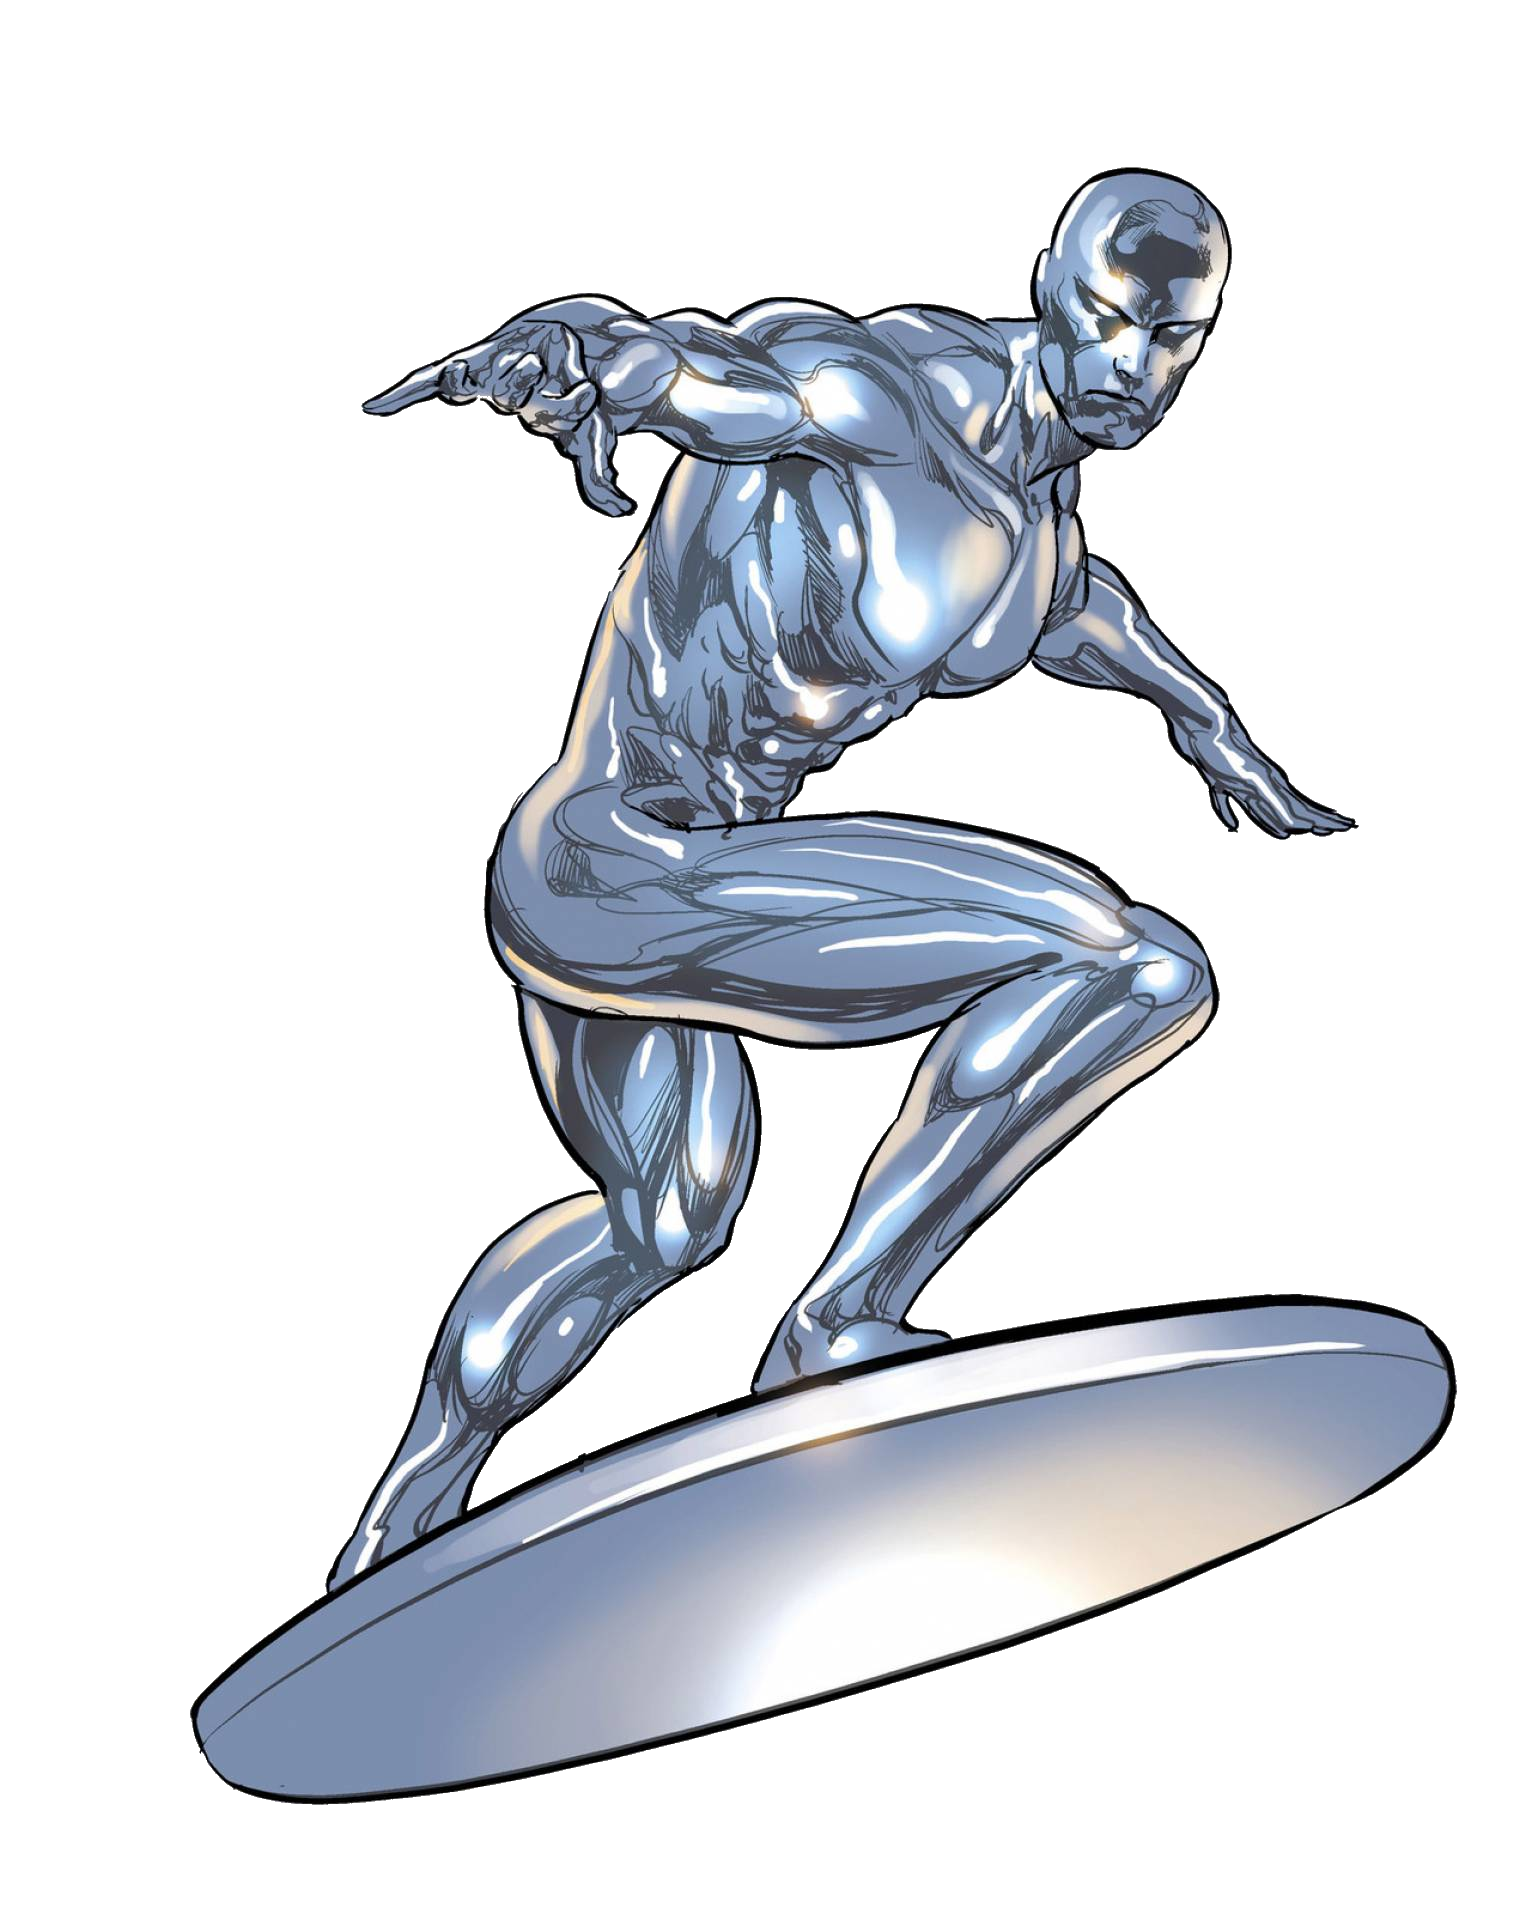 Silver Surfer | Character Profile Wikia | FANDOM powered by Wikia